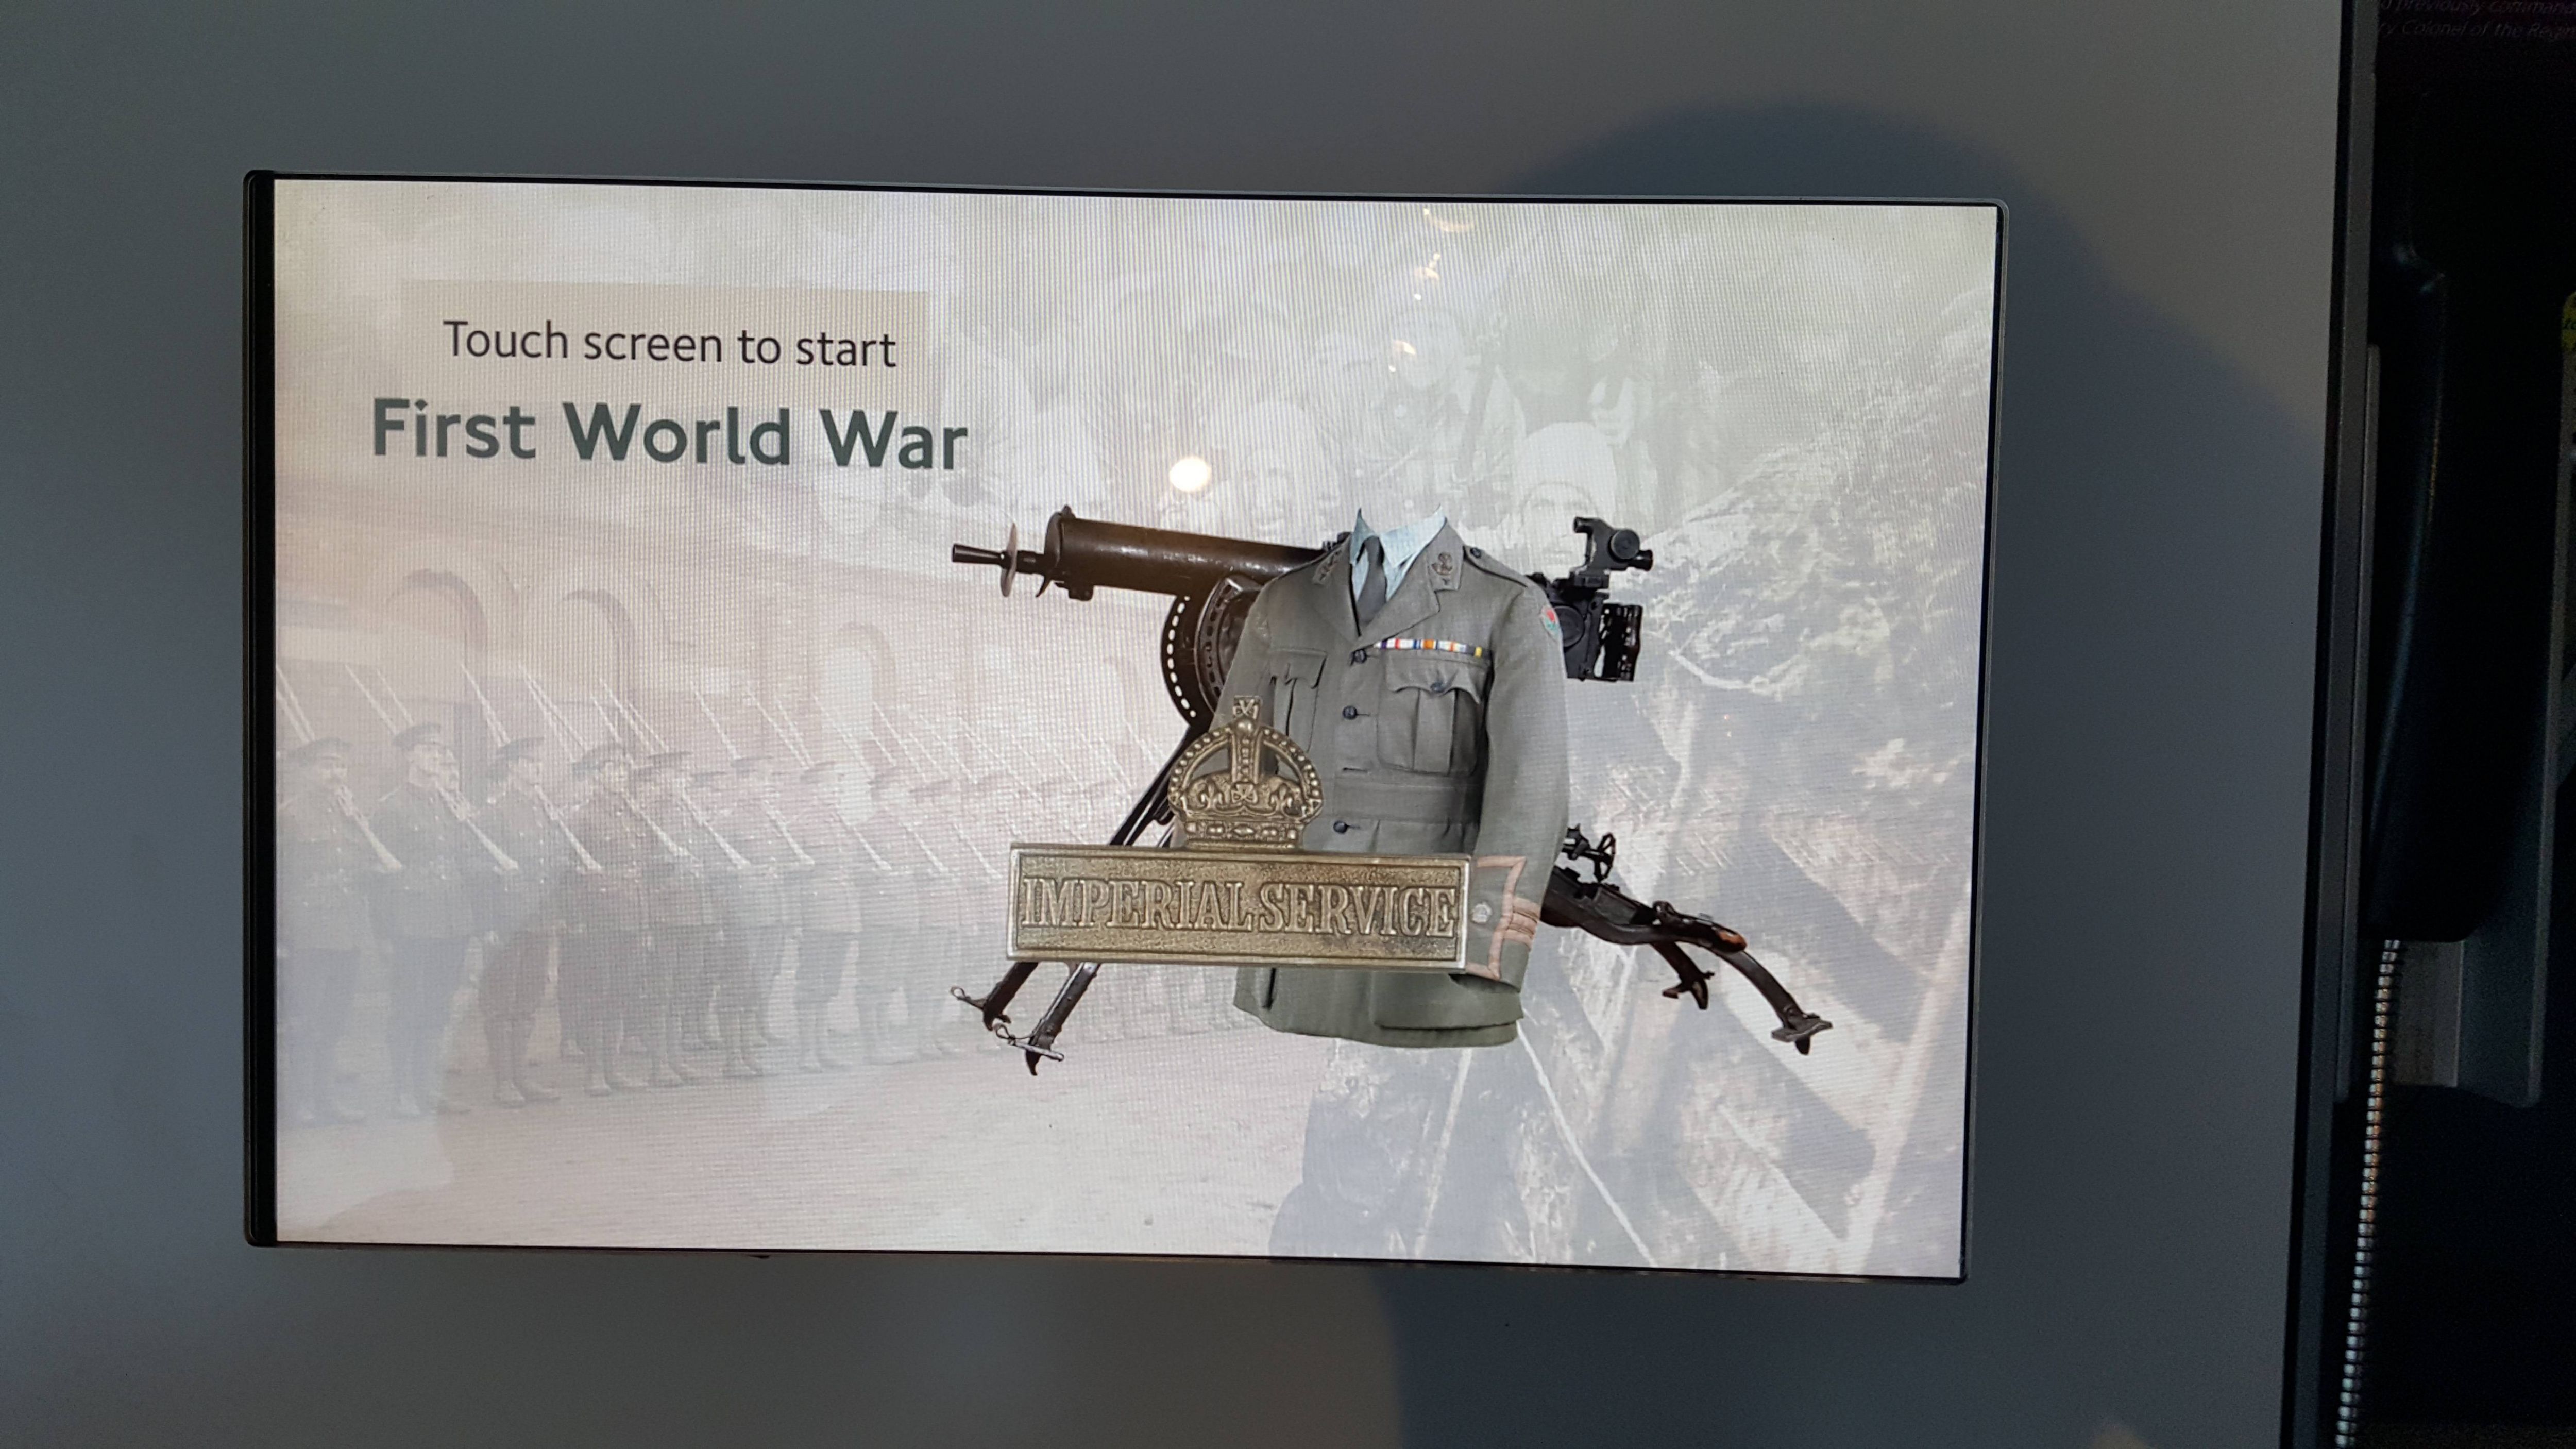 In a museum and I don't think I should touch the screen, just in case.